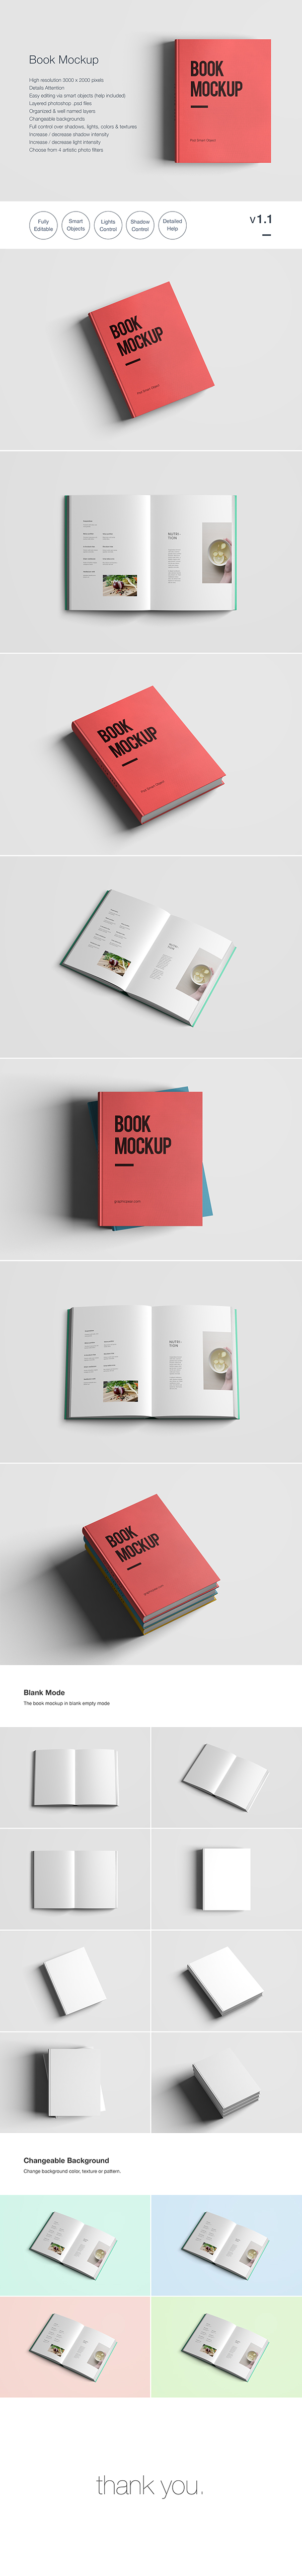 Book Mockup Images | Photos, Videos, Logos, Illustrations And Branding On  Behance